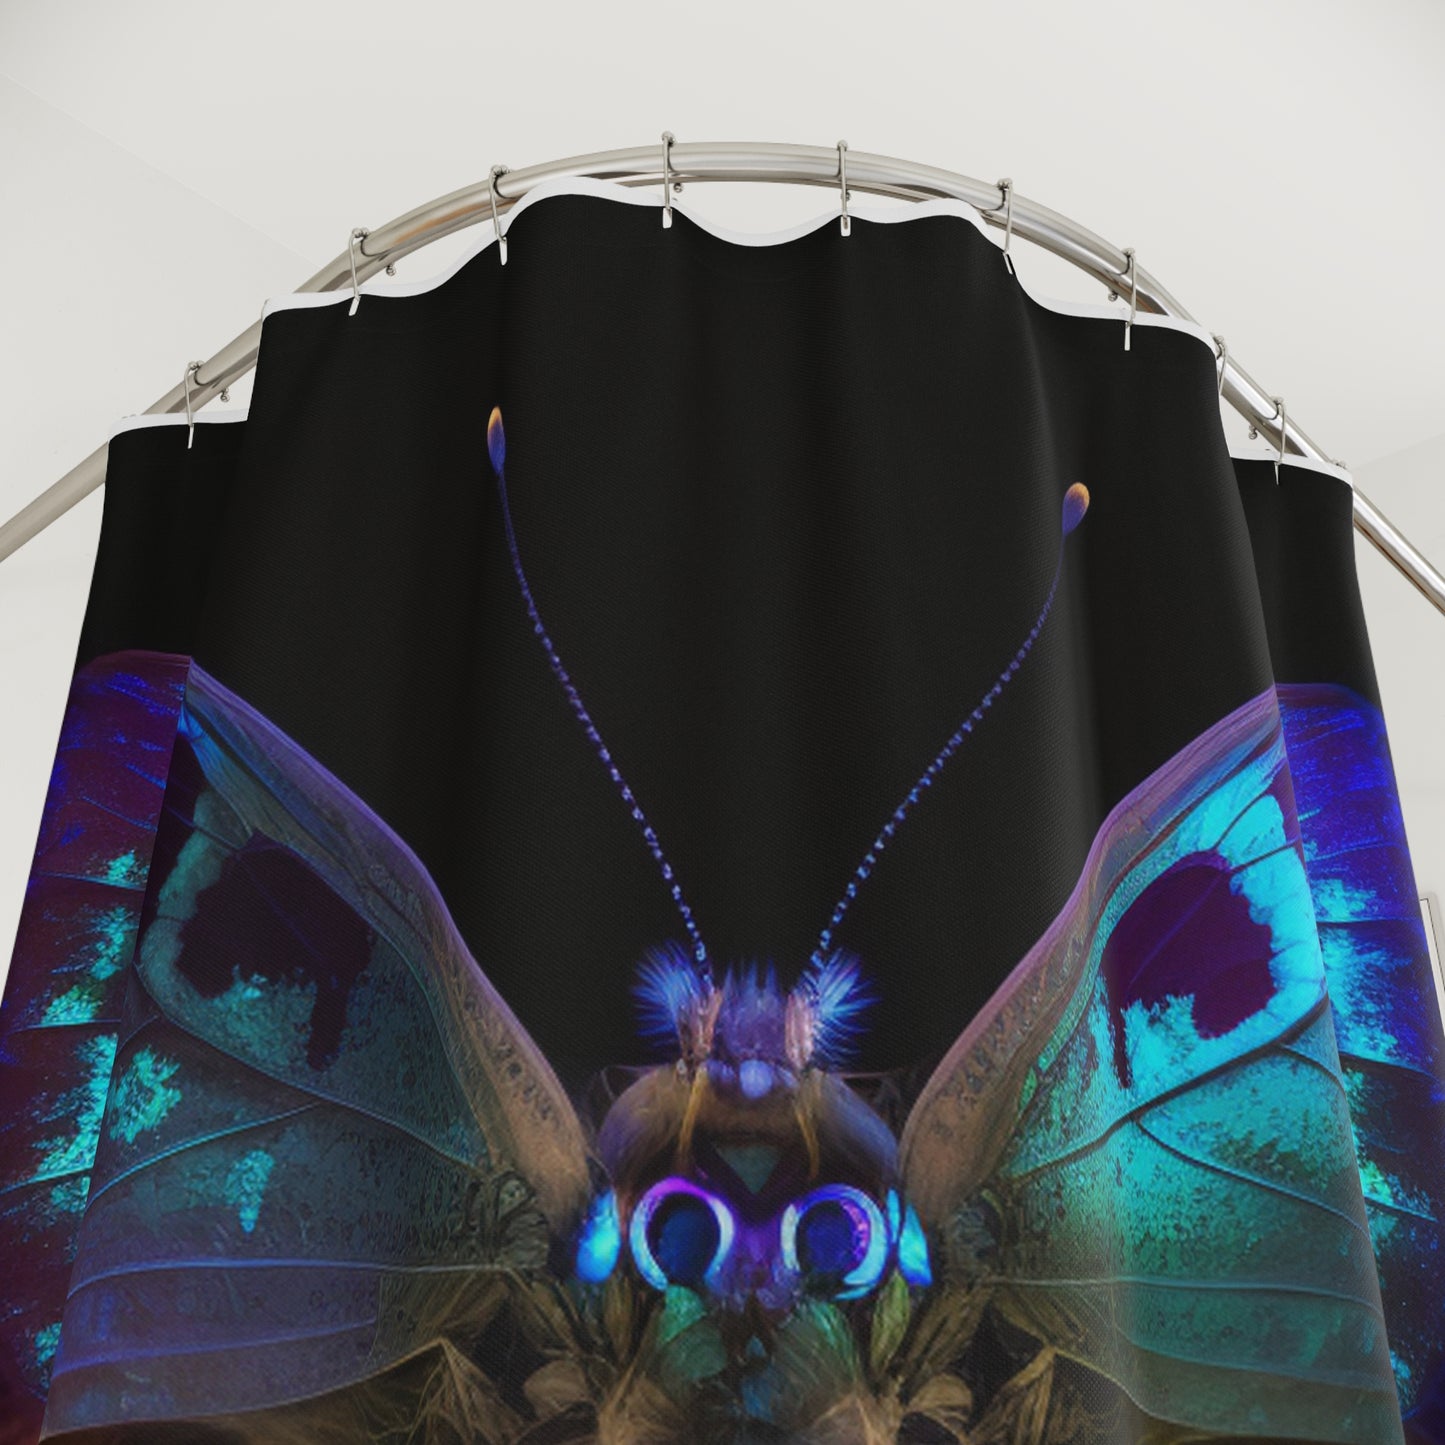 Polyester Shower Curtain Neon Hue Butterfly 4